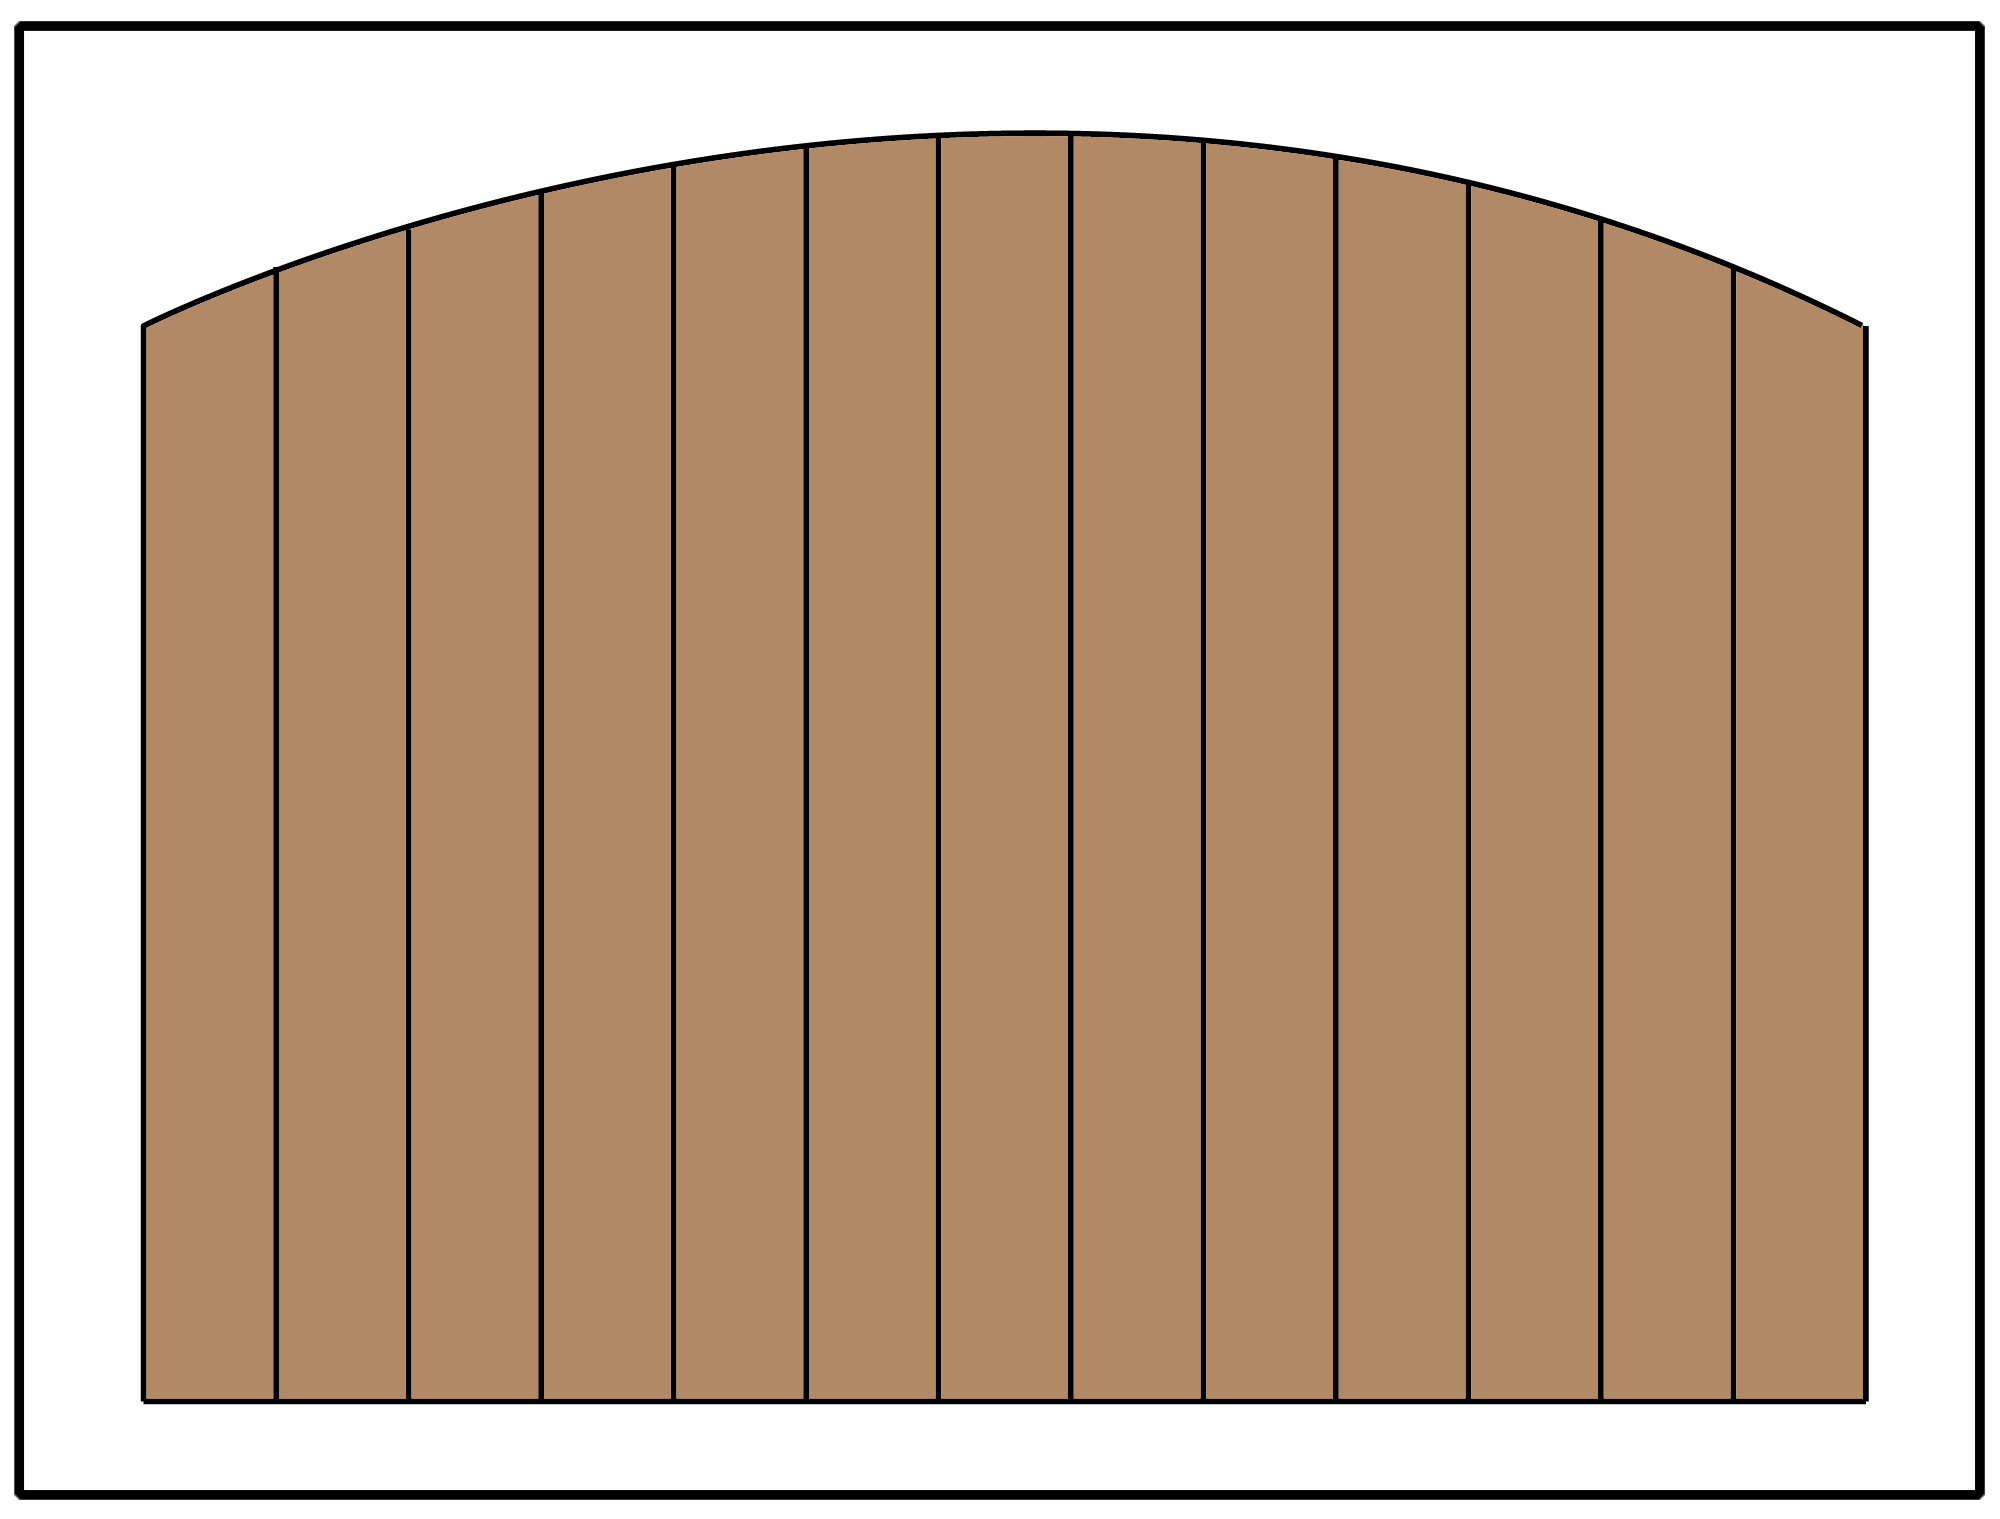 Illustration of a privacy fence with an arched curve in the panel